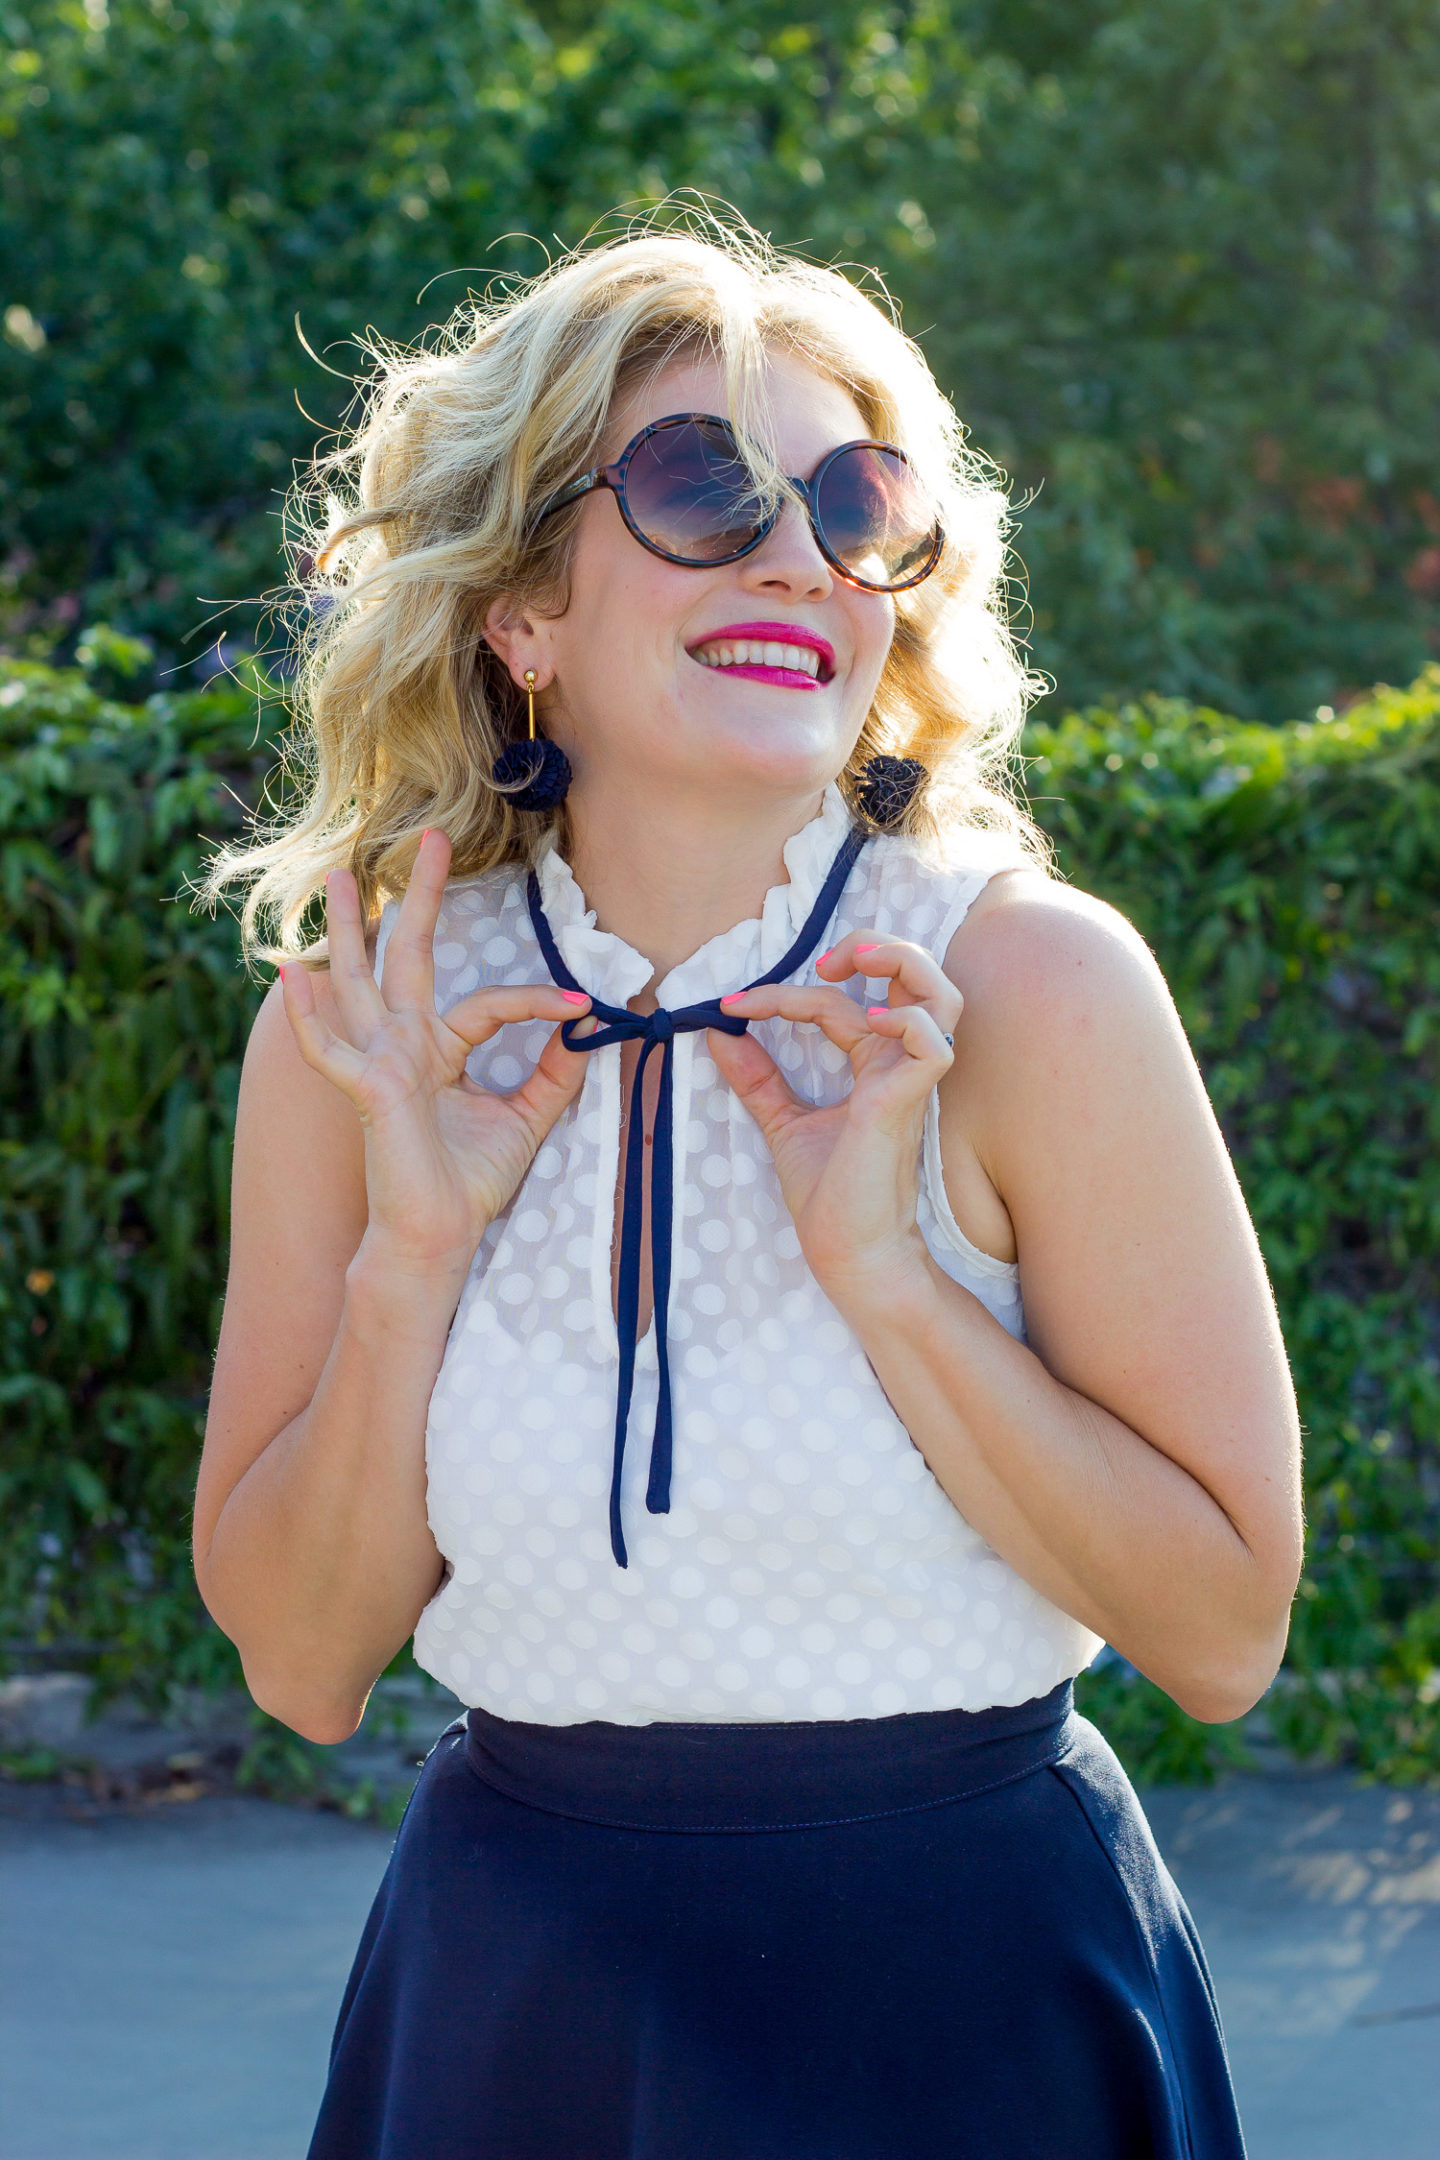 Modcloth Woven Tie Neck Top in Dotted White on Belle Meets World blog